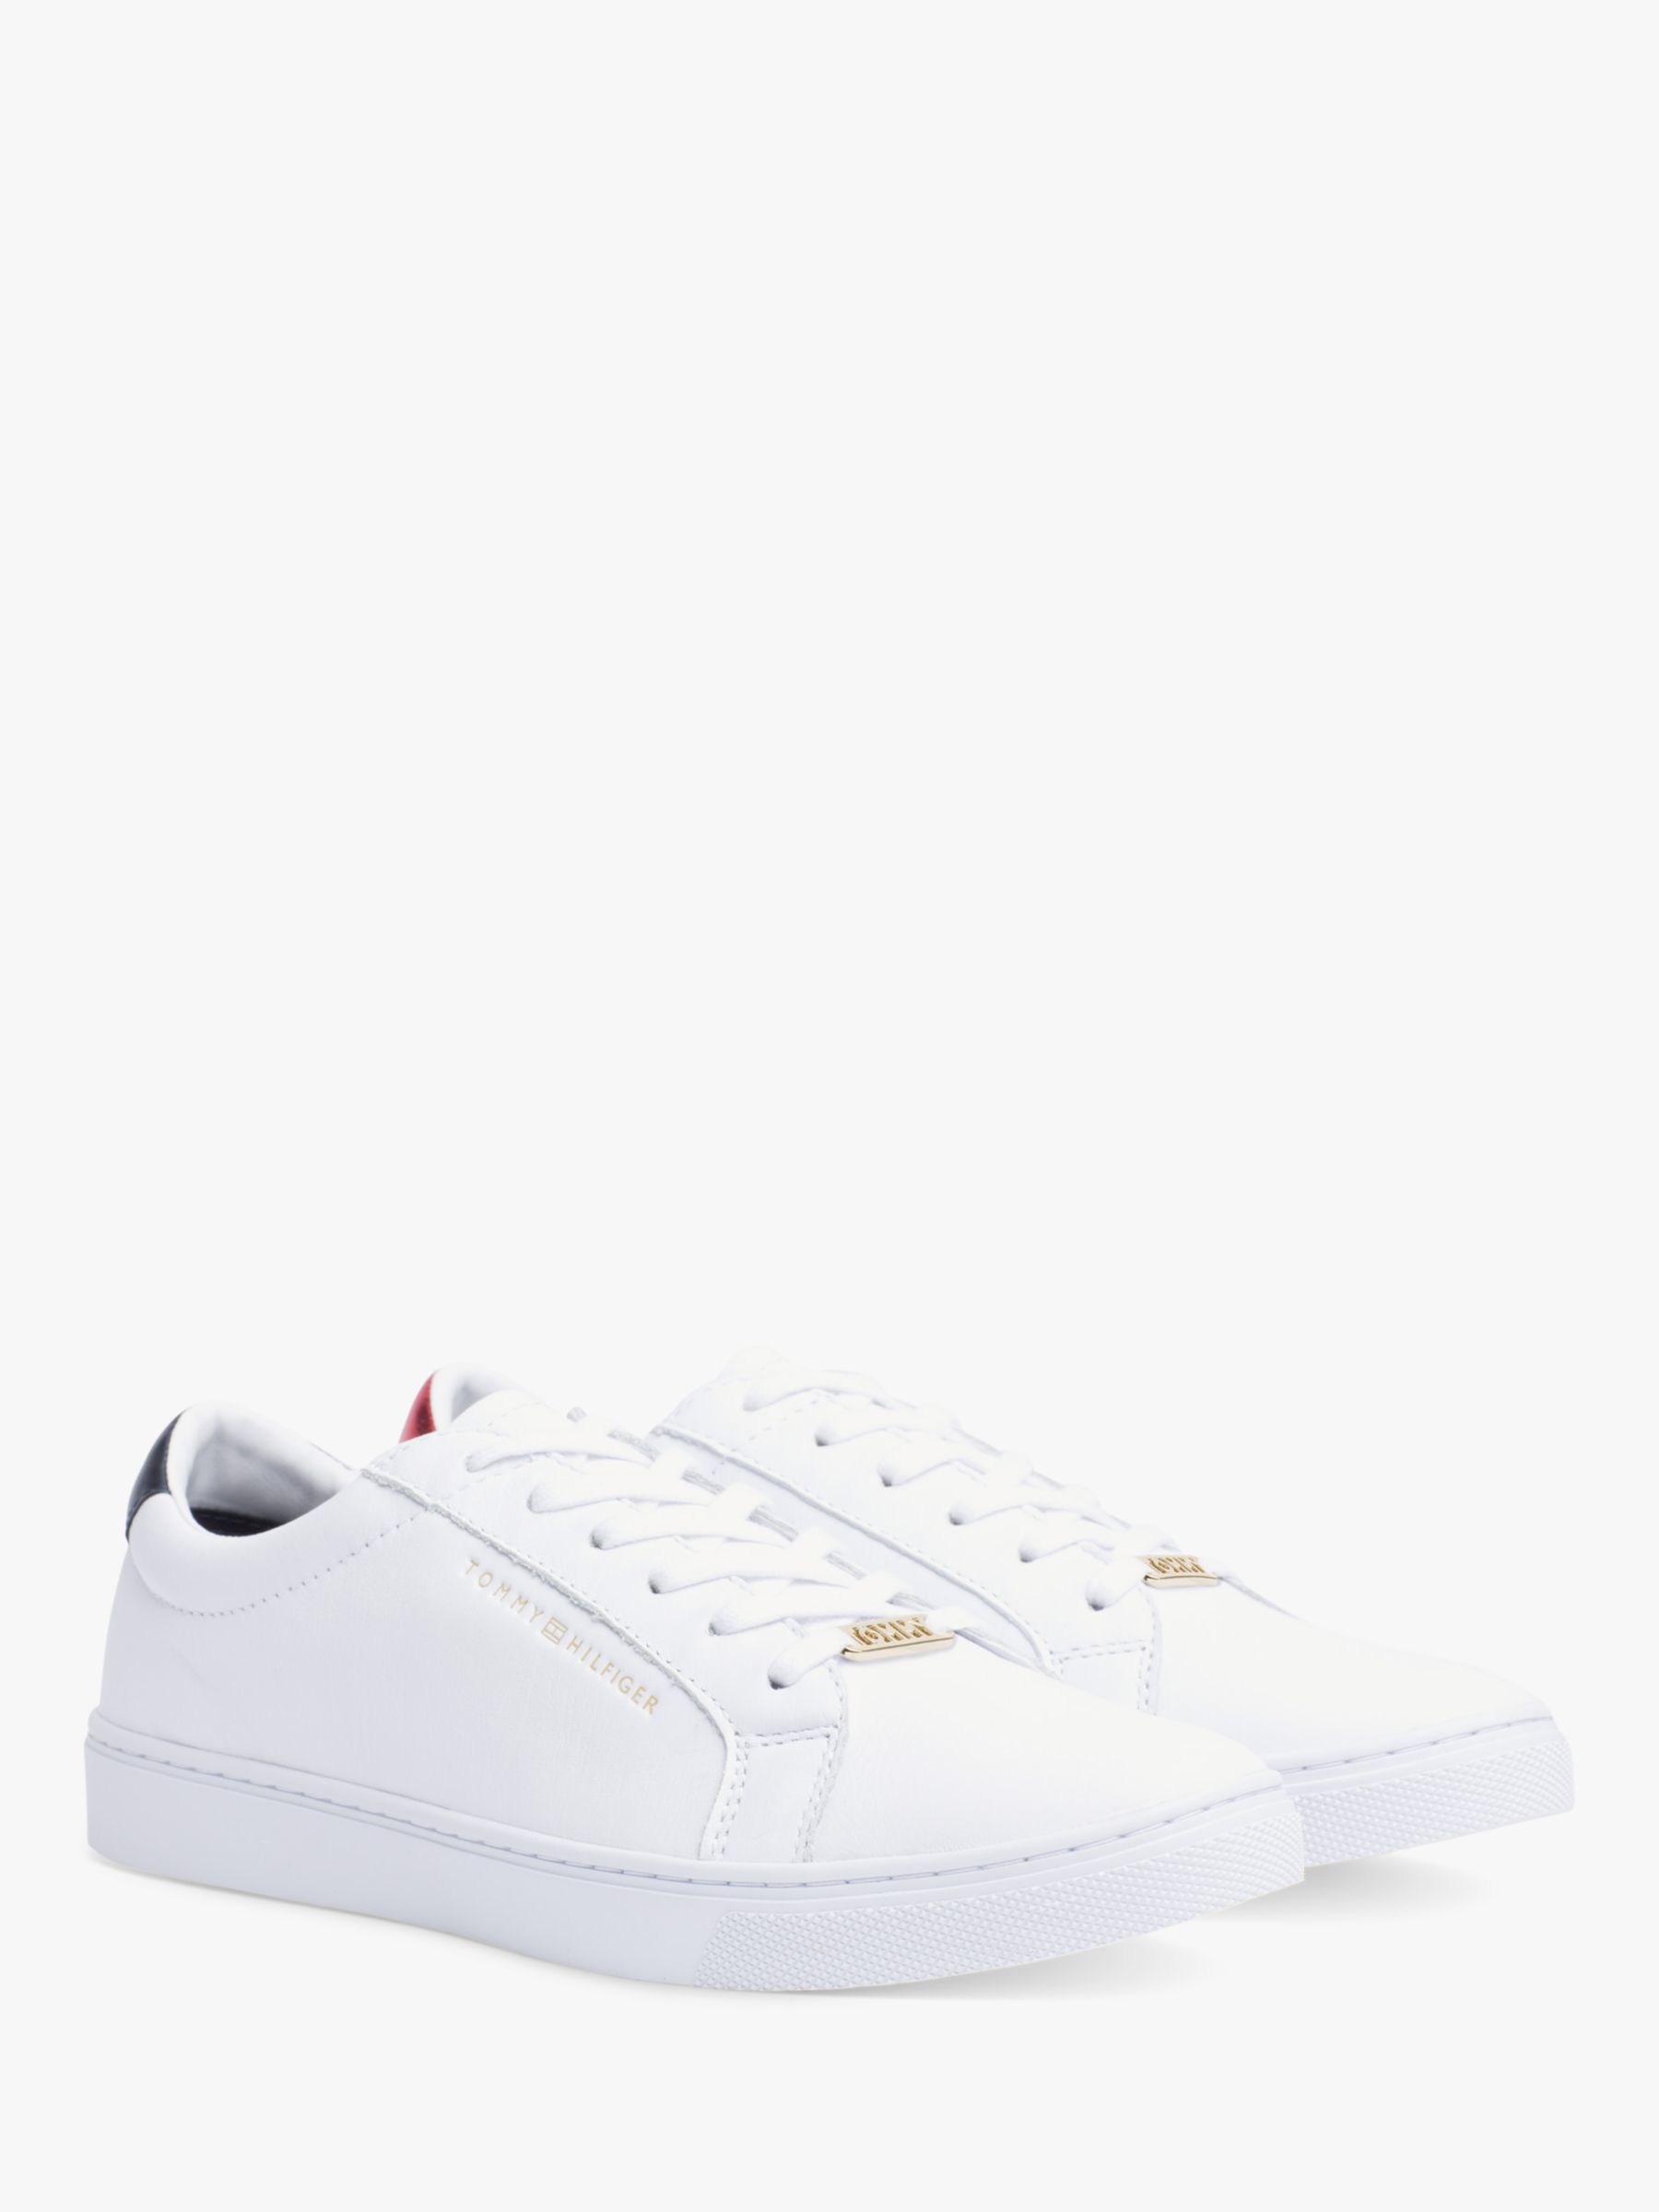 Tommy Hilfiger Leather Essential Trainers, White at John Lewis & Partners